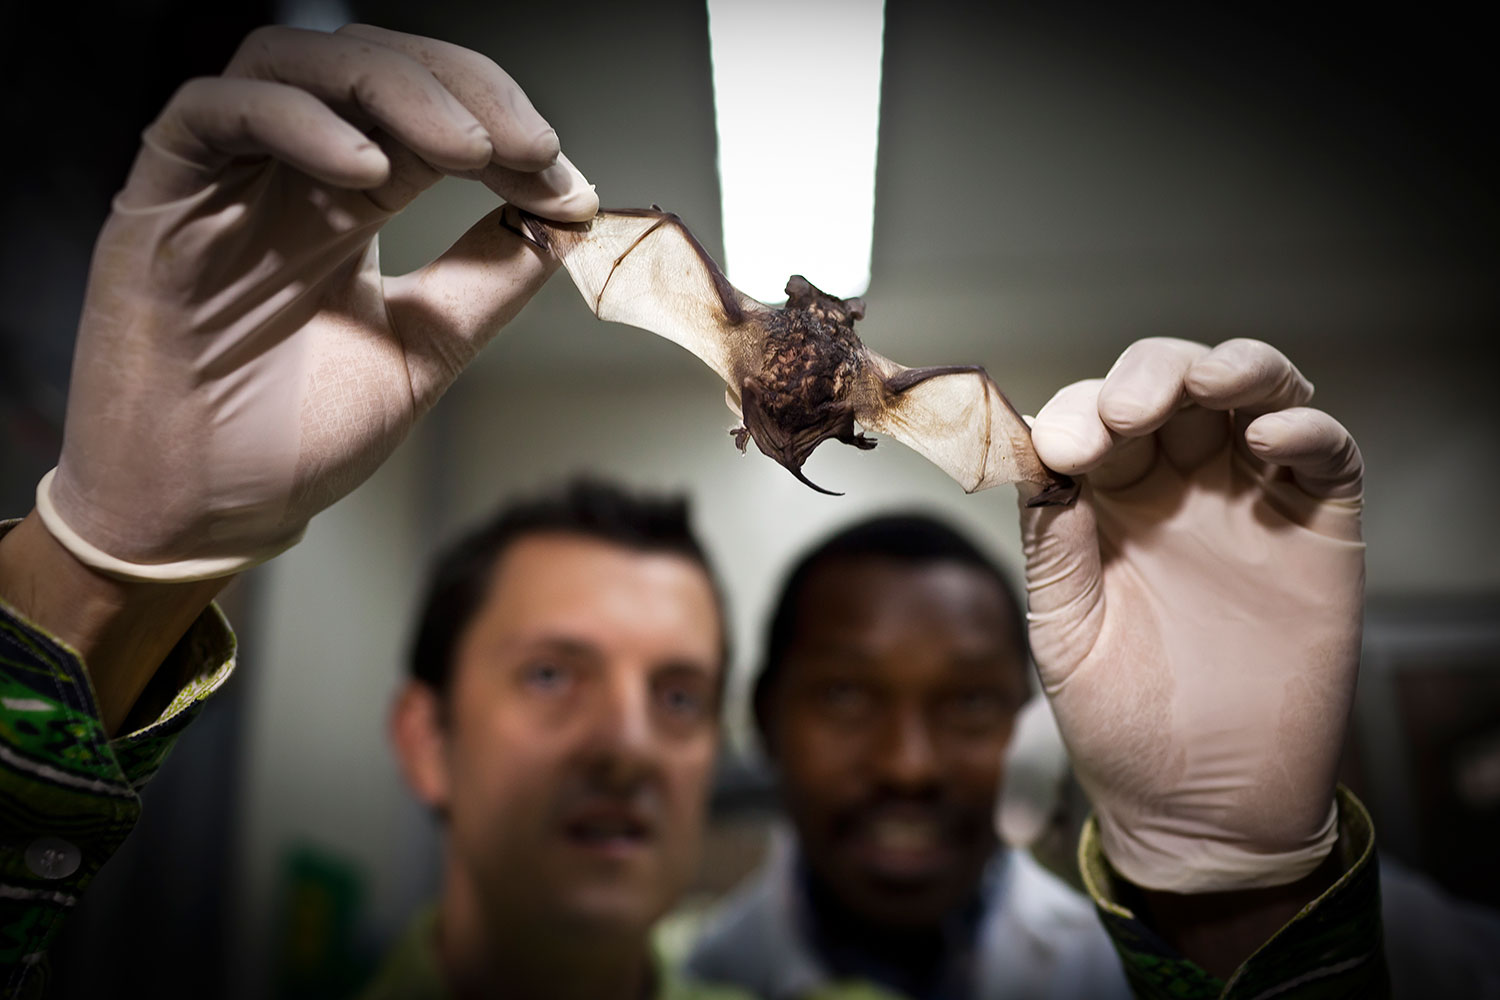 Mat Lebreton and Cyrille Djoko examine a bat as part of their search for dangerous animal pathogens in the Global Viral Forecasting Initiative Lab in Yaounde, Cameroon on July 28, 2011.